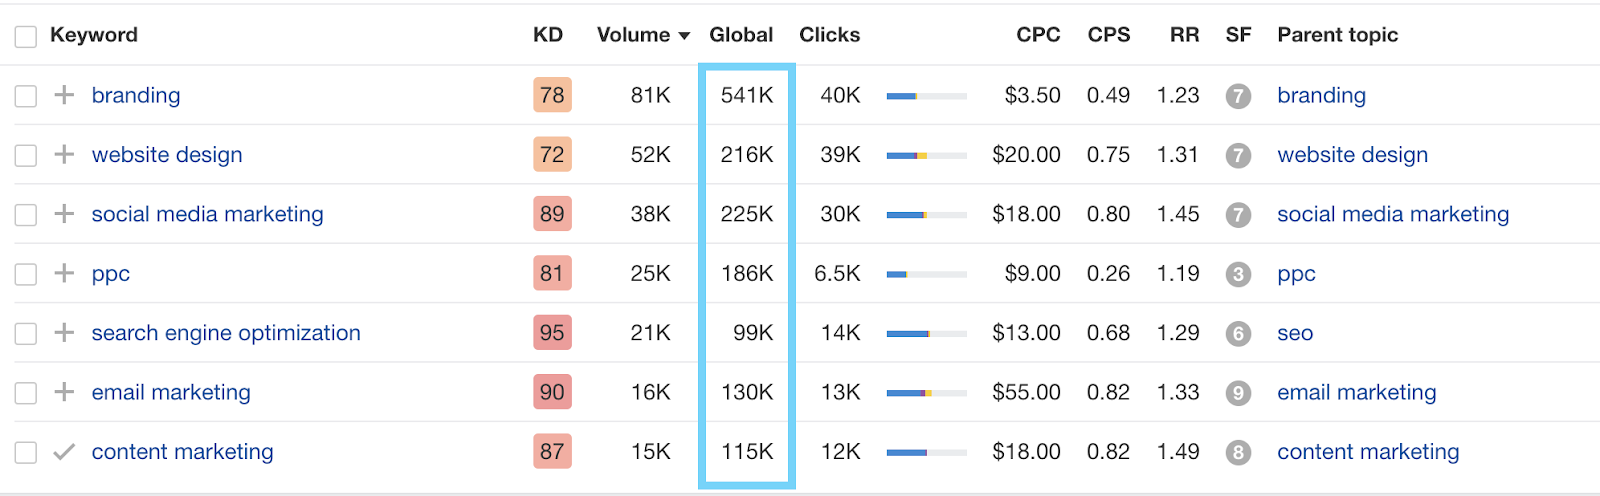 choose keywords for seo global searches and volume